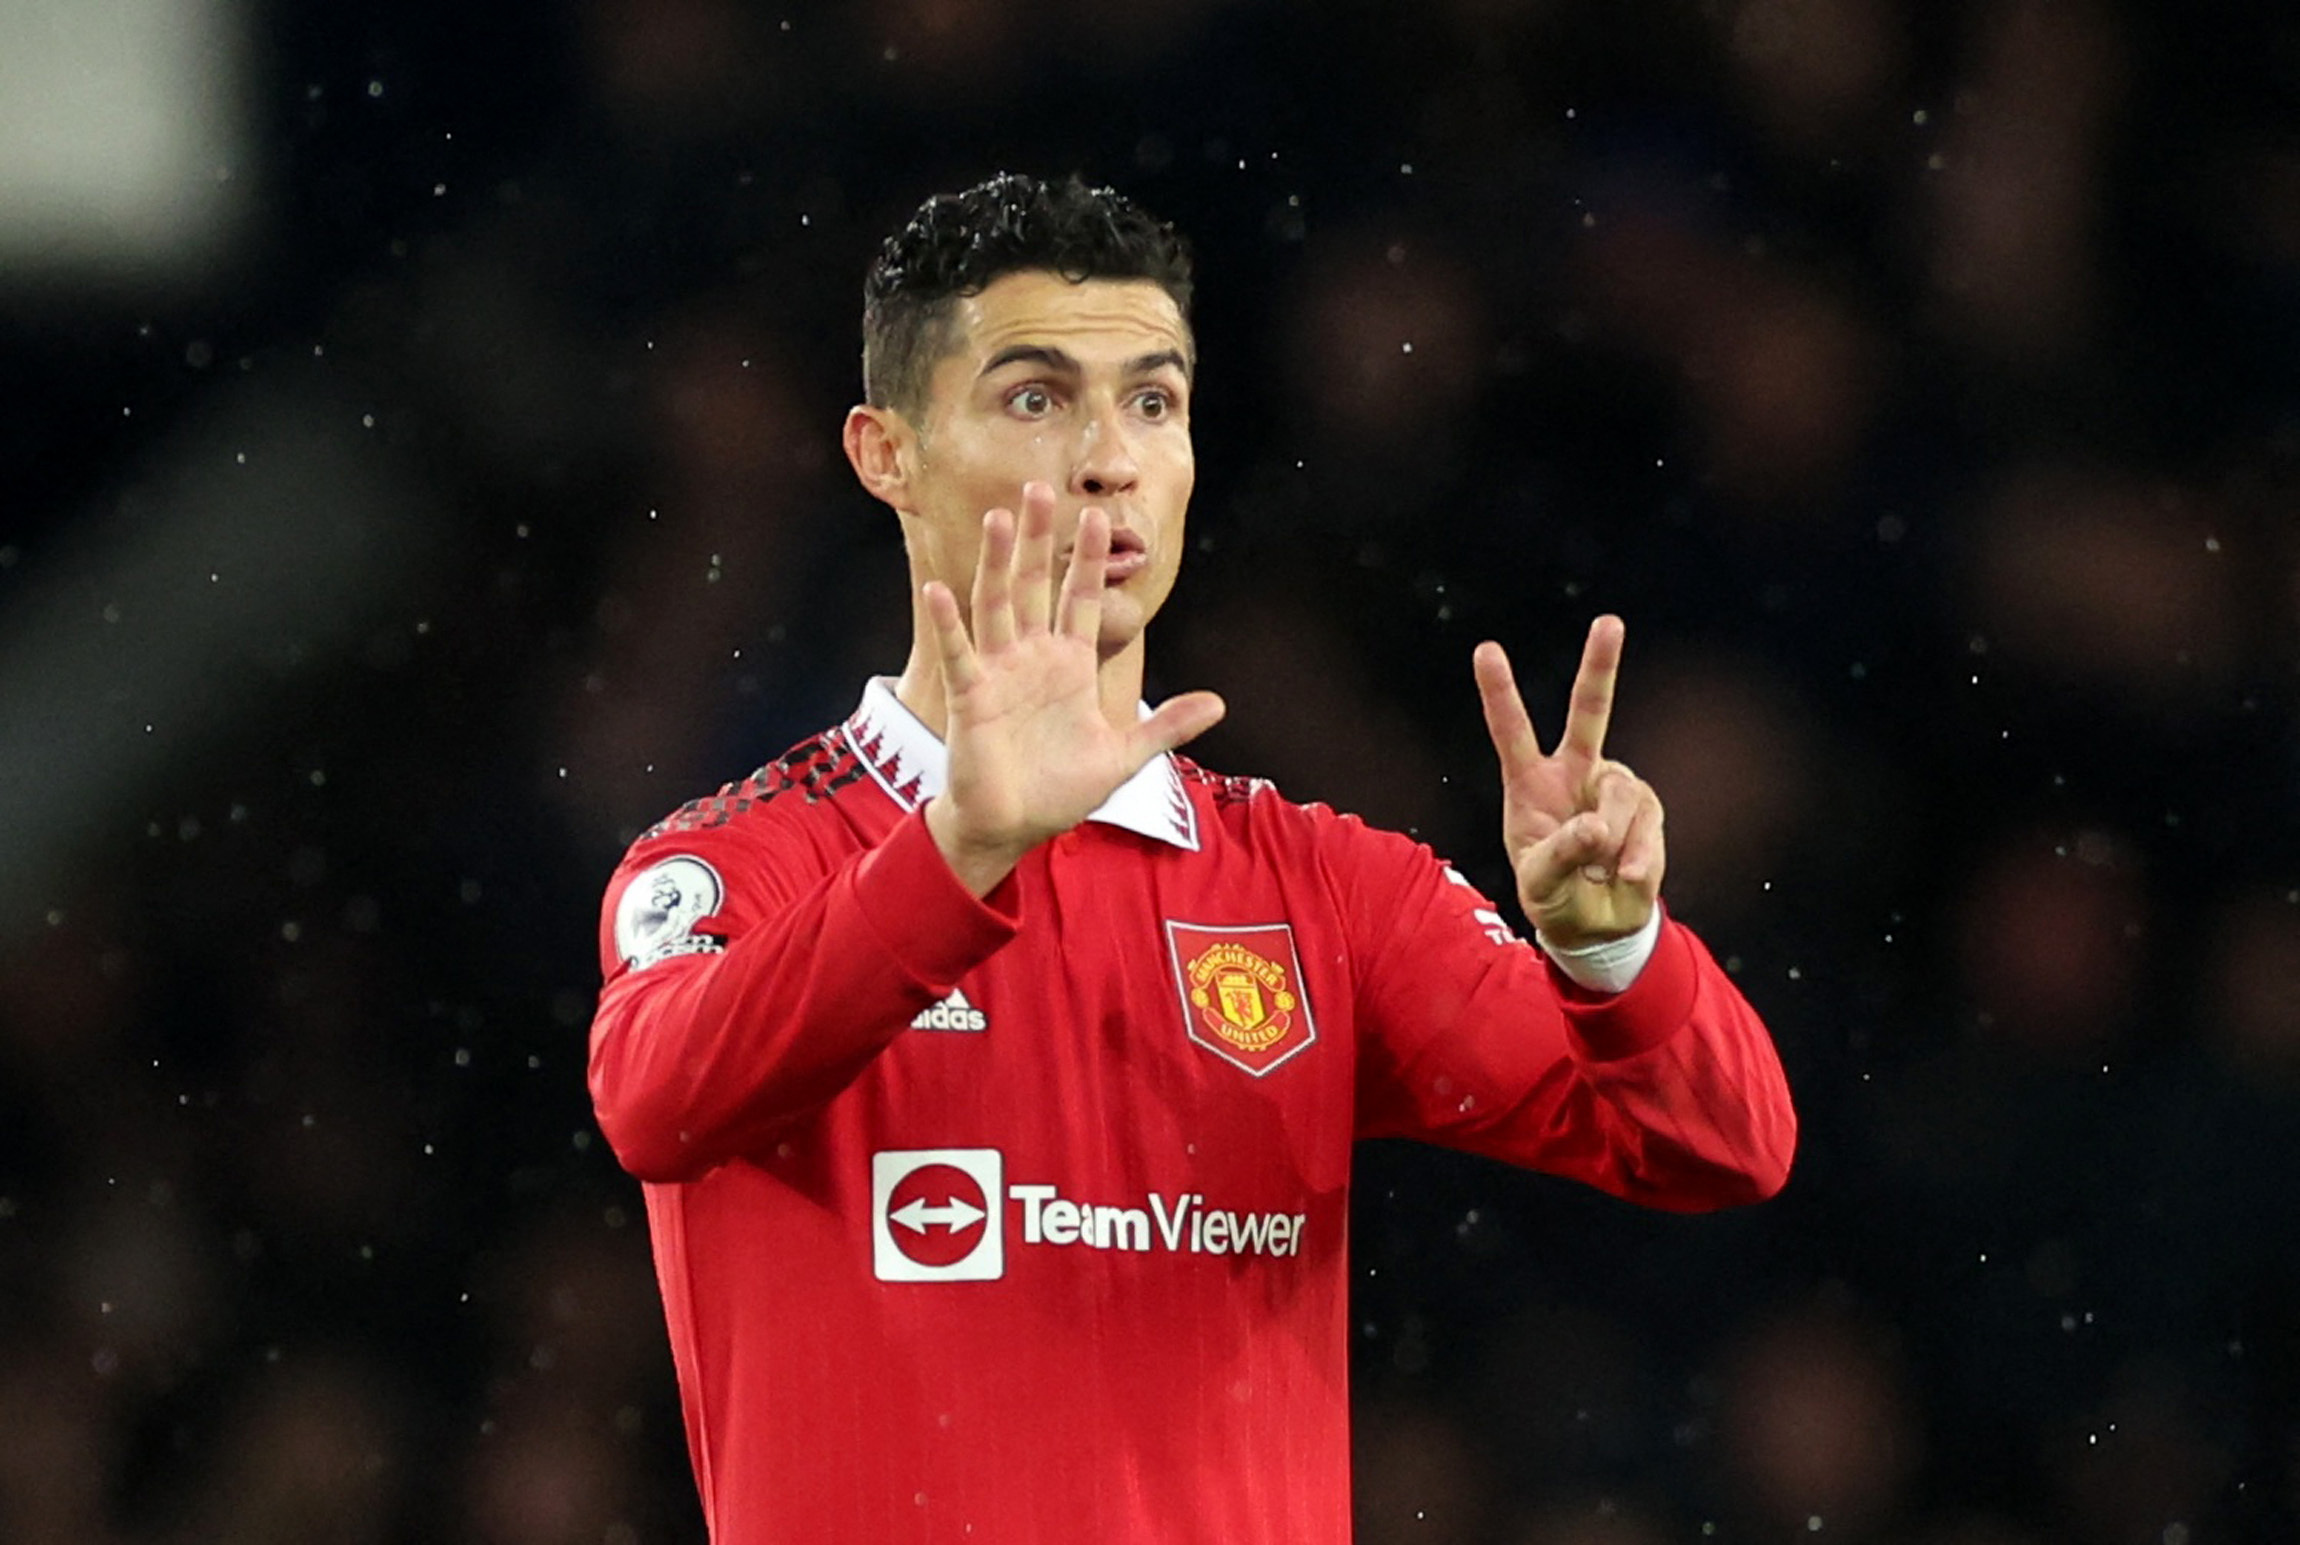 Ronaldo feels “betrayed” by Manchester United and is being “forced out”